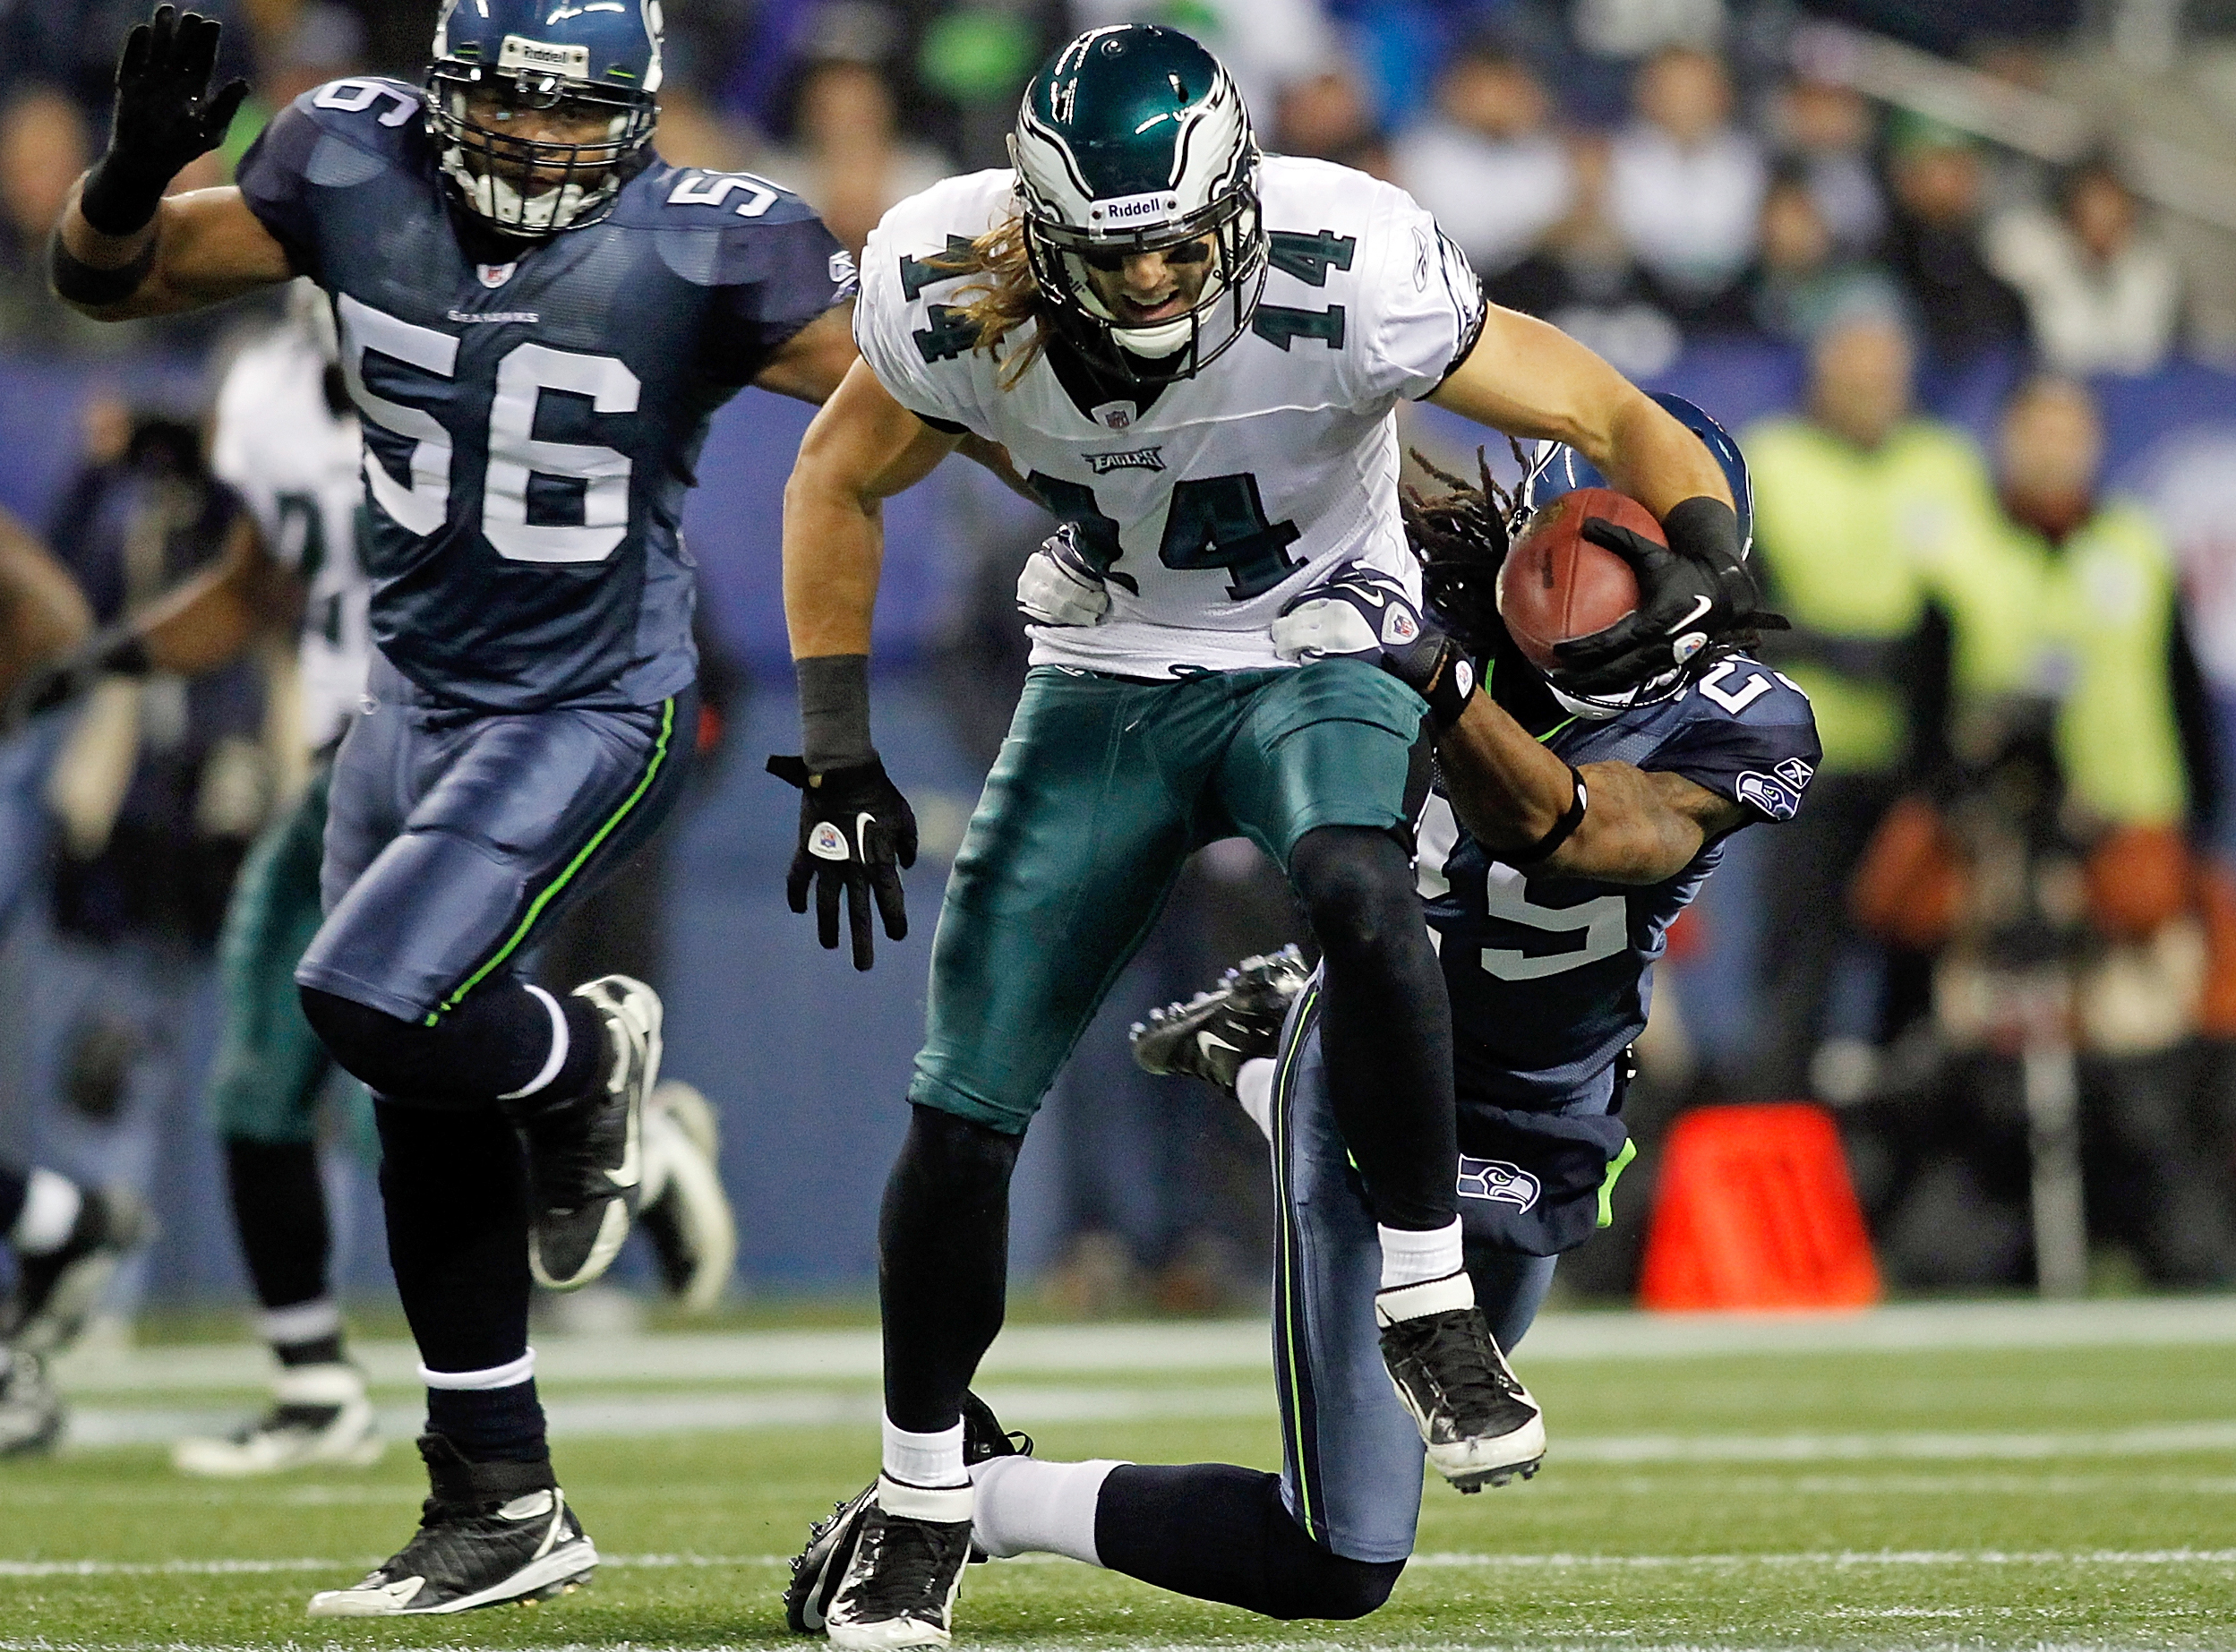 Richard Sherman tackles Riley Cooper in December 2011. (Photo by Jonathan Ferrey/Getty Images)